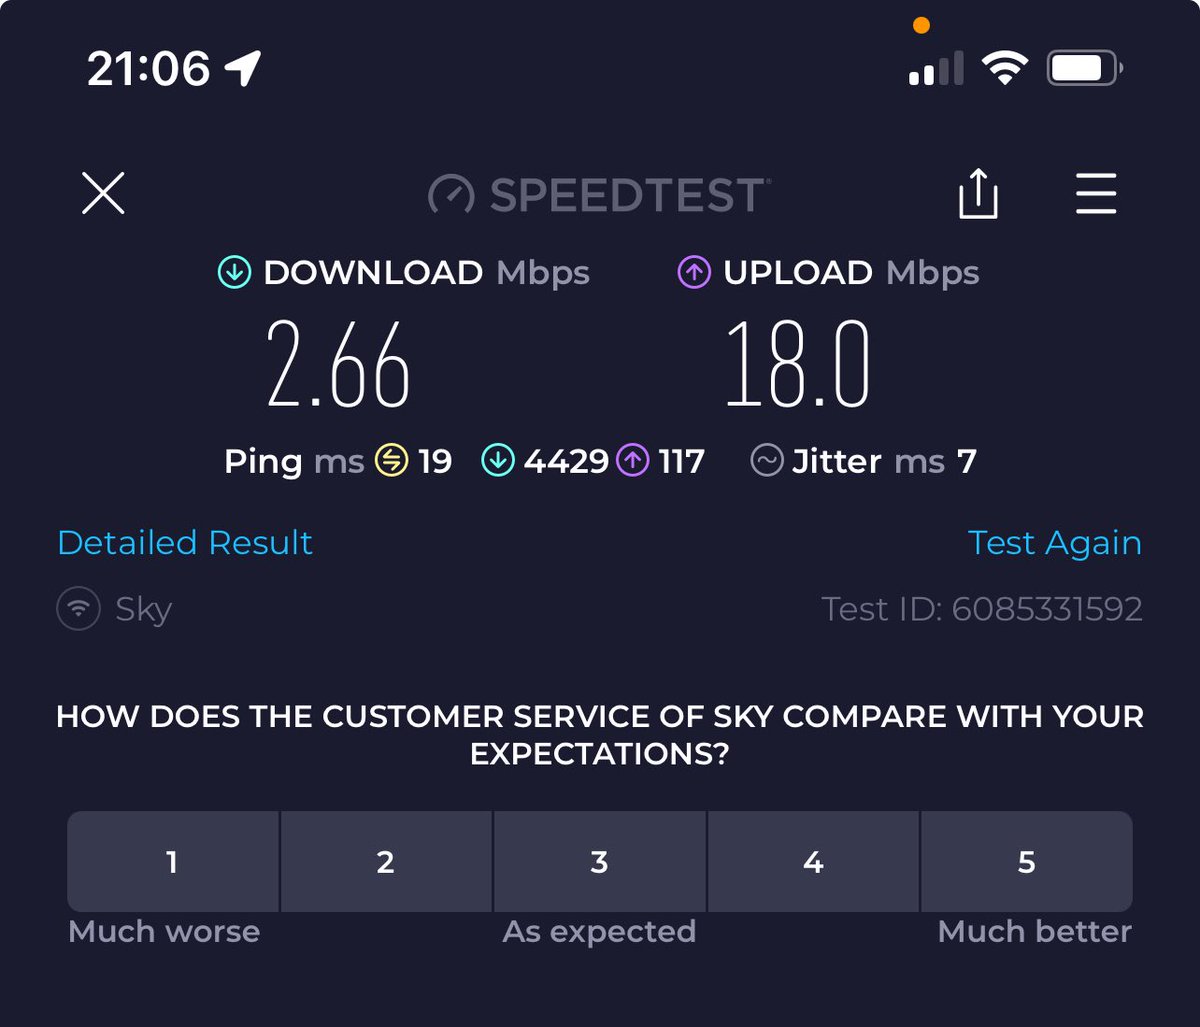 And that is while Sky can f&#k right off with their super fast broadband which we pay £50 a month for super fast #robbingbastards